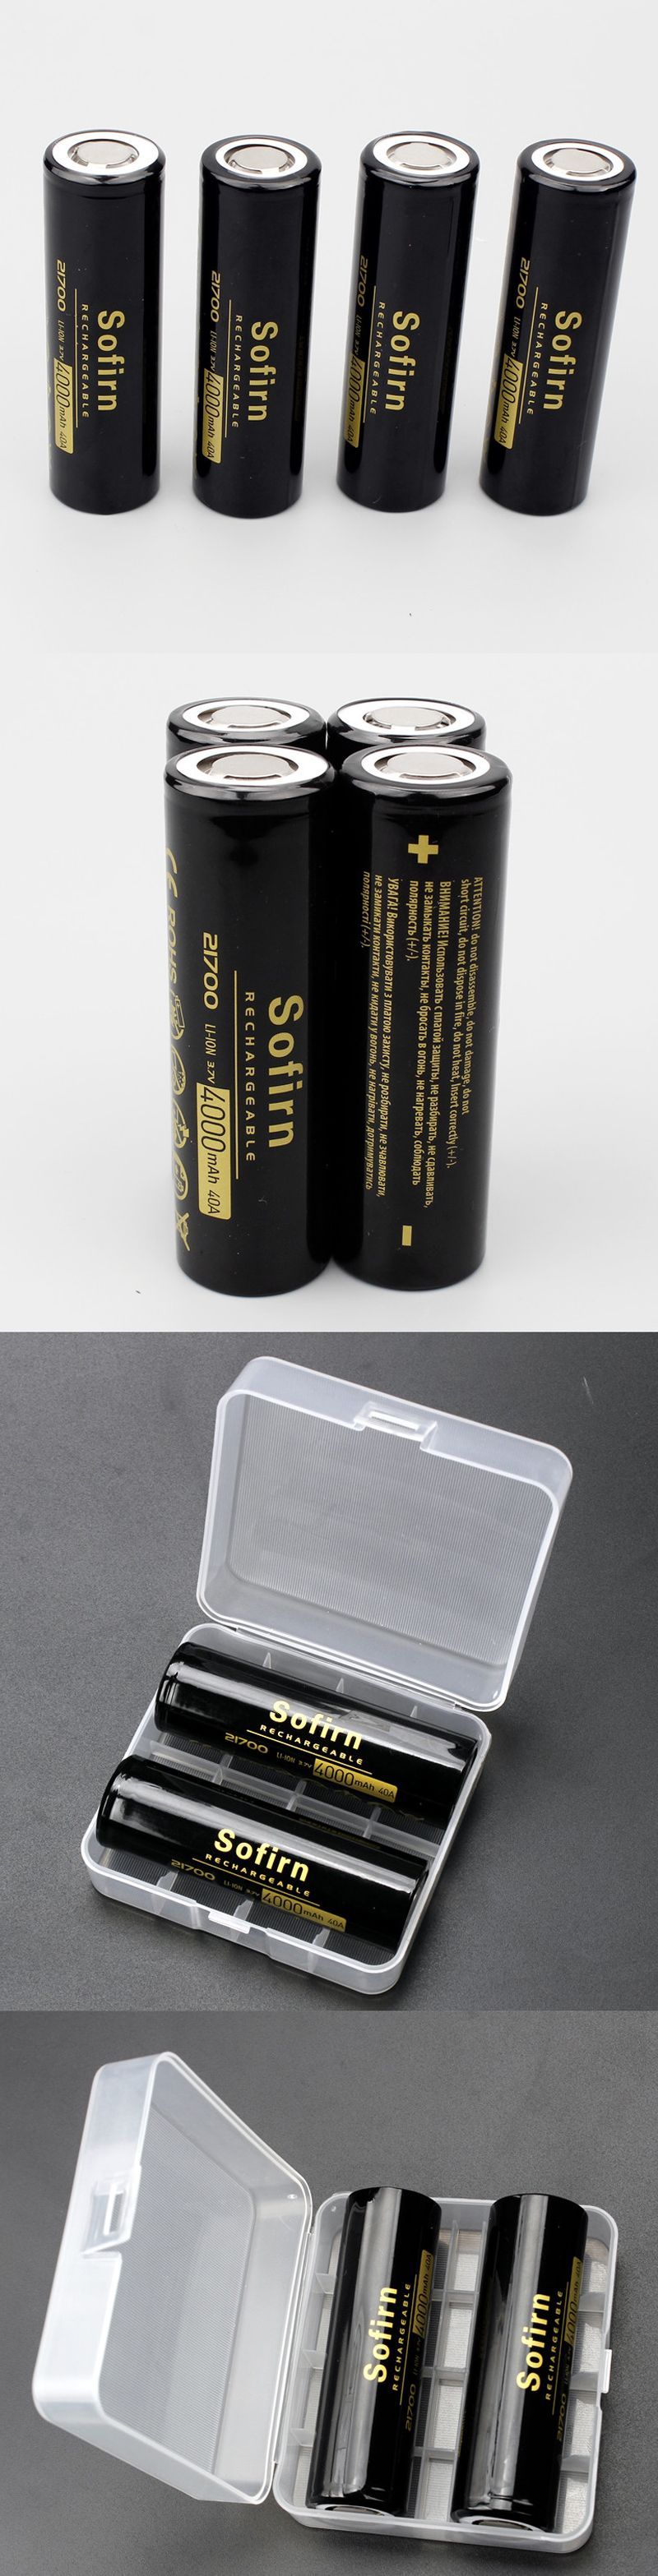 2Pcs-Sofirn-37V-40A-4000mAh-21700-Battery-Lithium-Ion-Battery-Rechargeable-Batterry-Li-ion-Battery-2-1451804